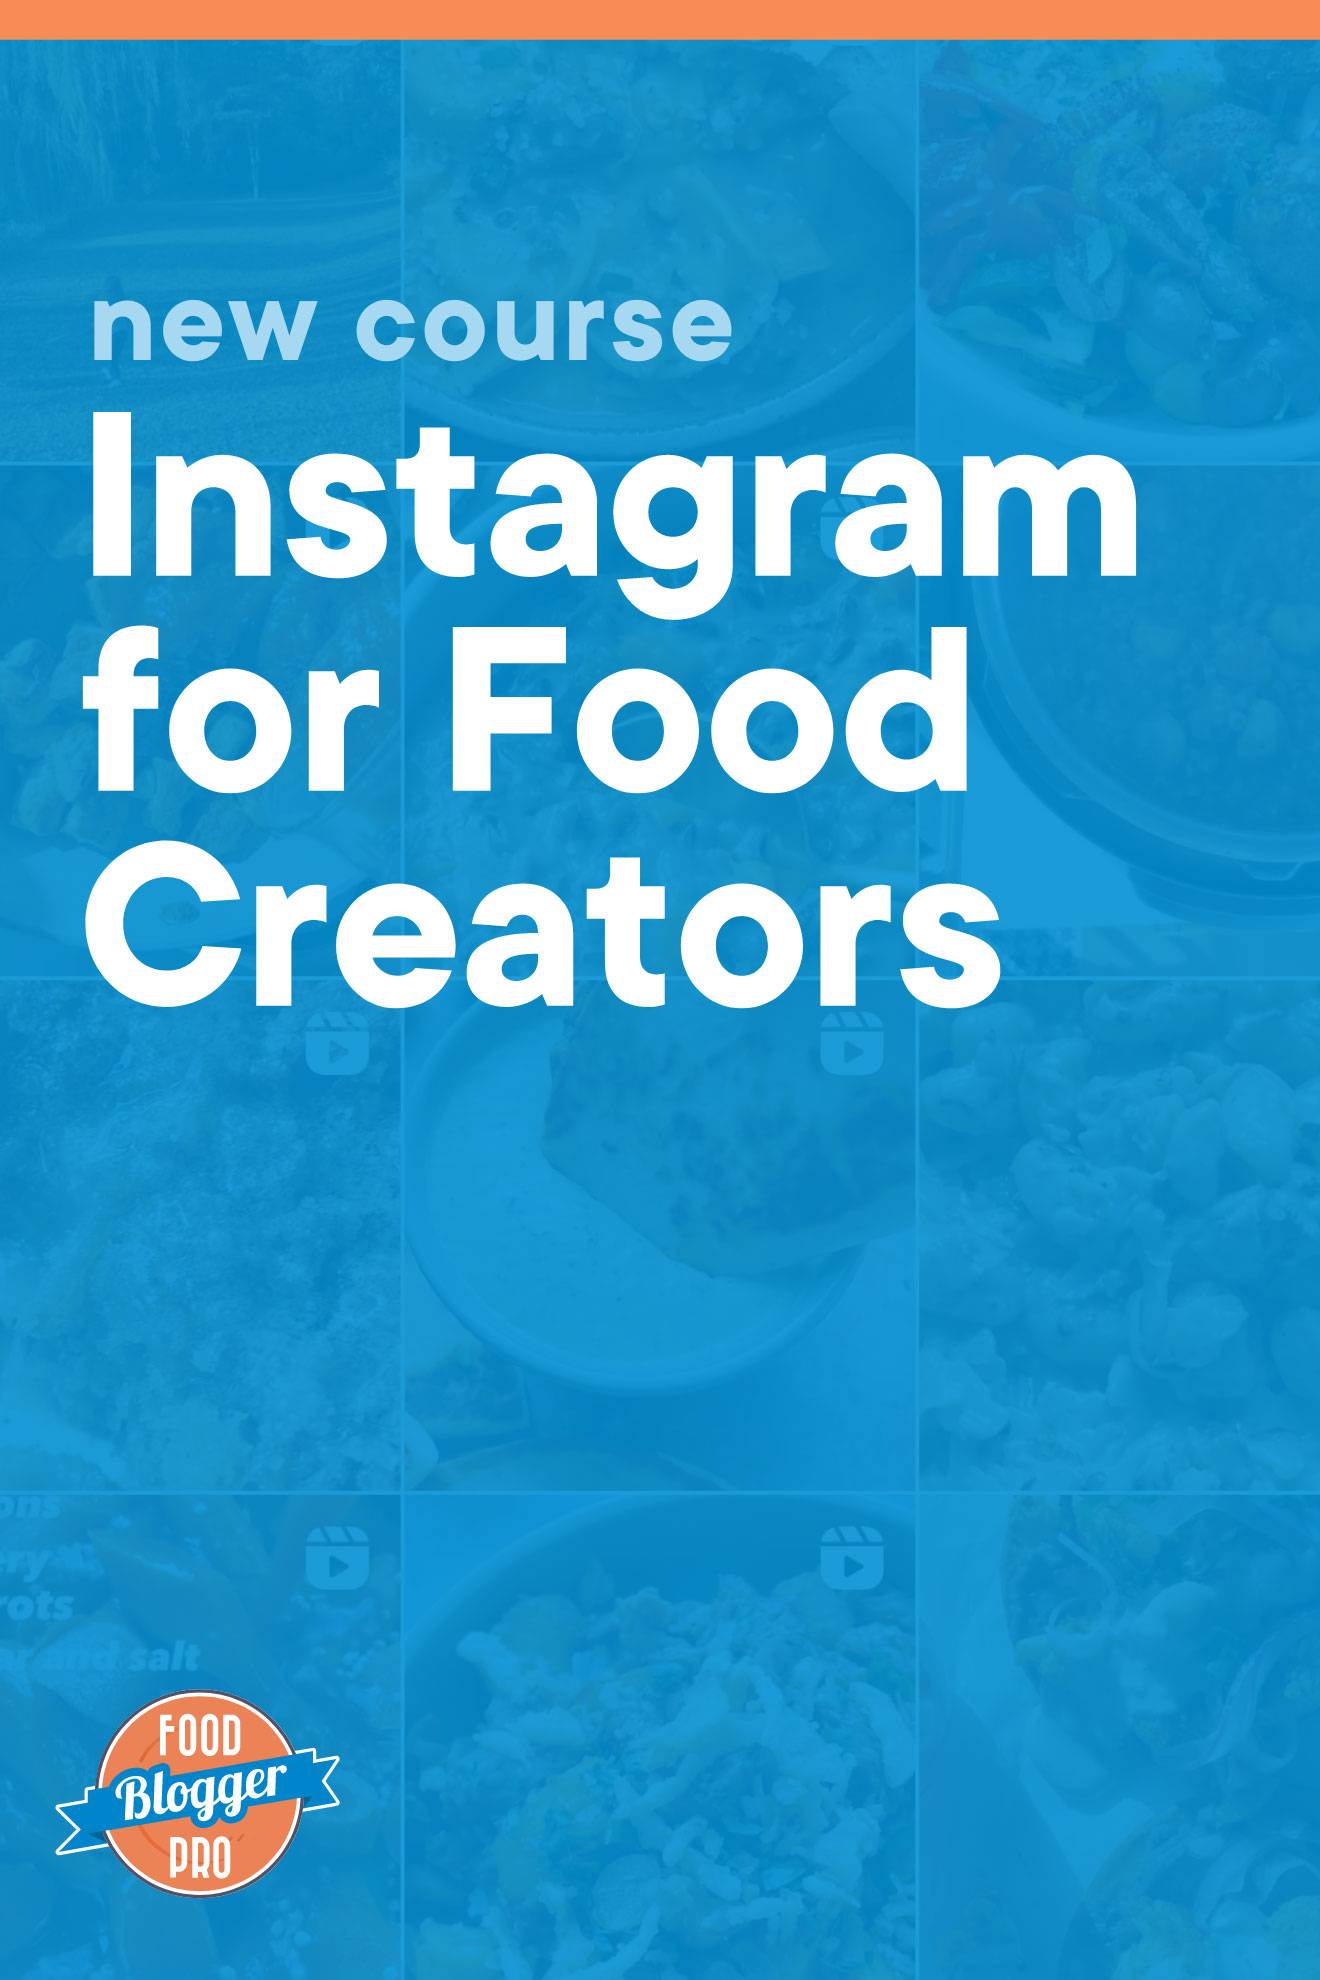 Blue graphic of the Pinch of Yum Instagram feed that reads 'New Course: Instagram for Food Creators' with Food Blogger Pro logo